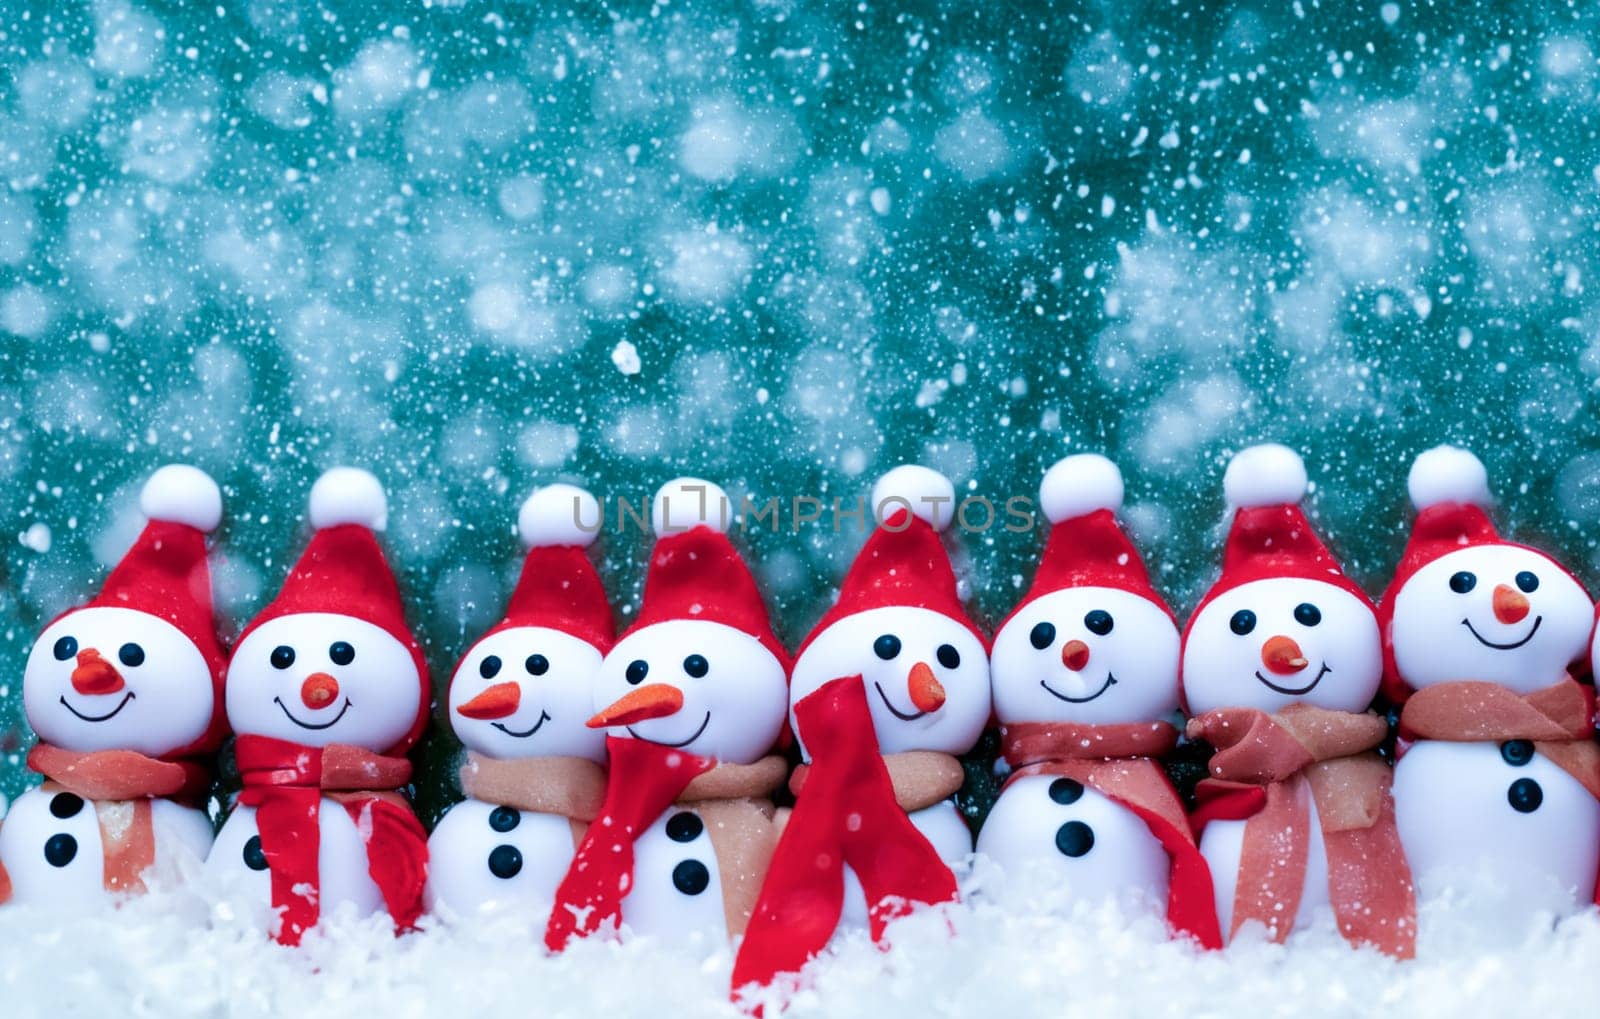 row with snowman with santa head and winter snowy background by compuinfoto